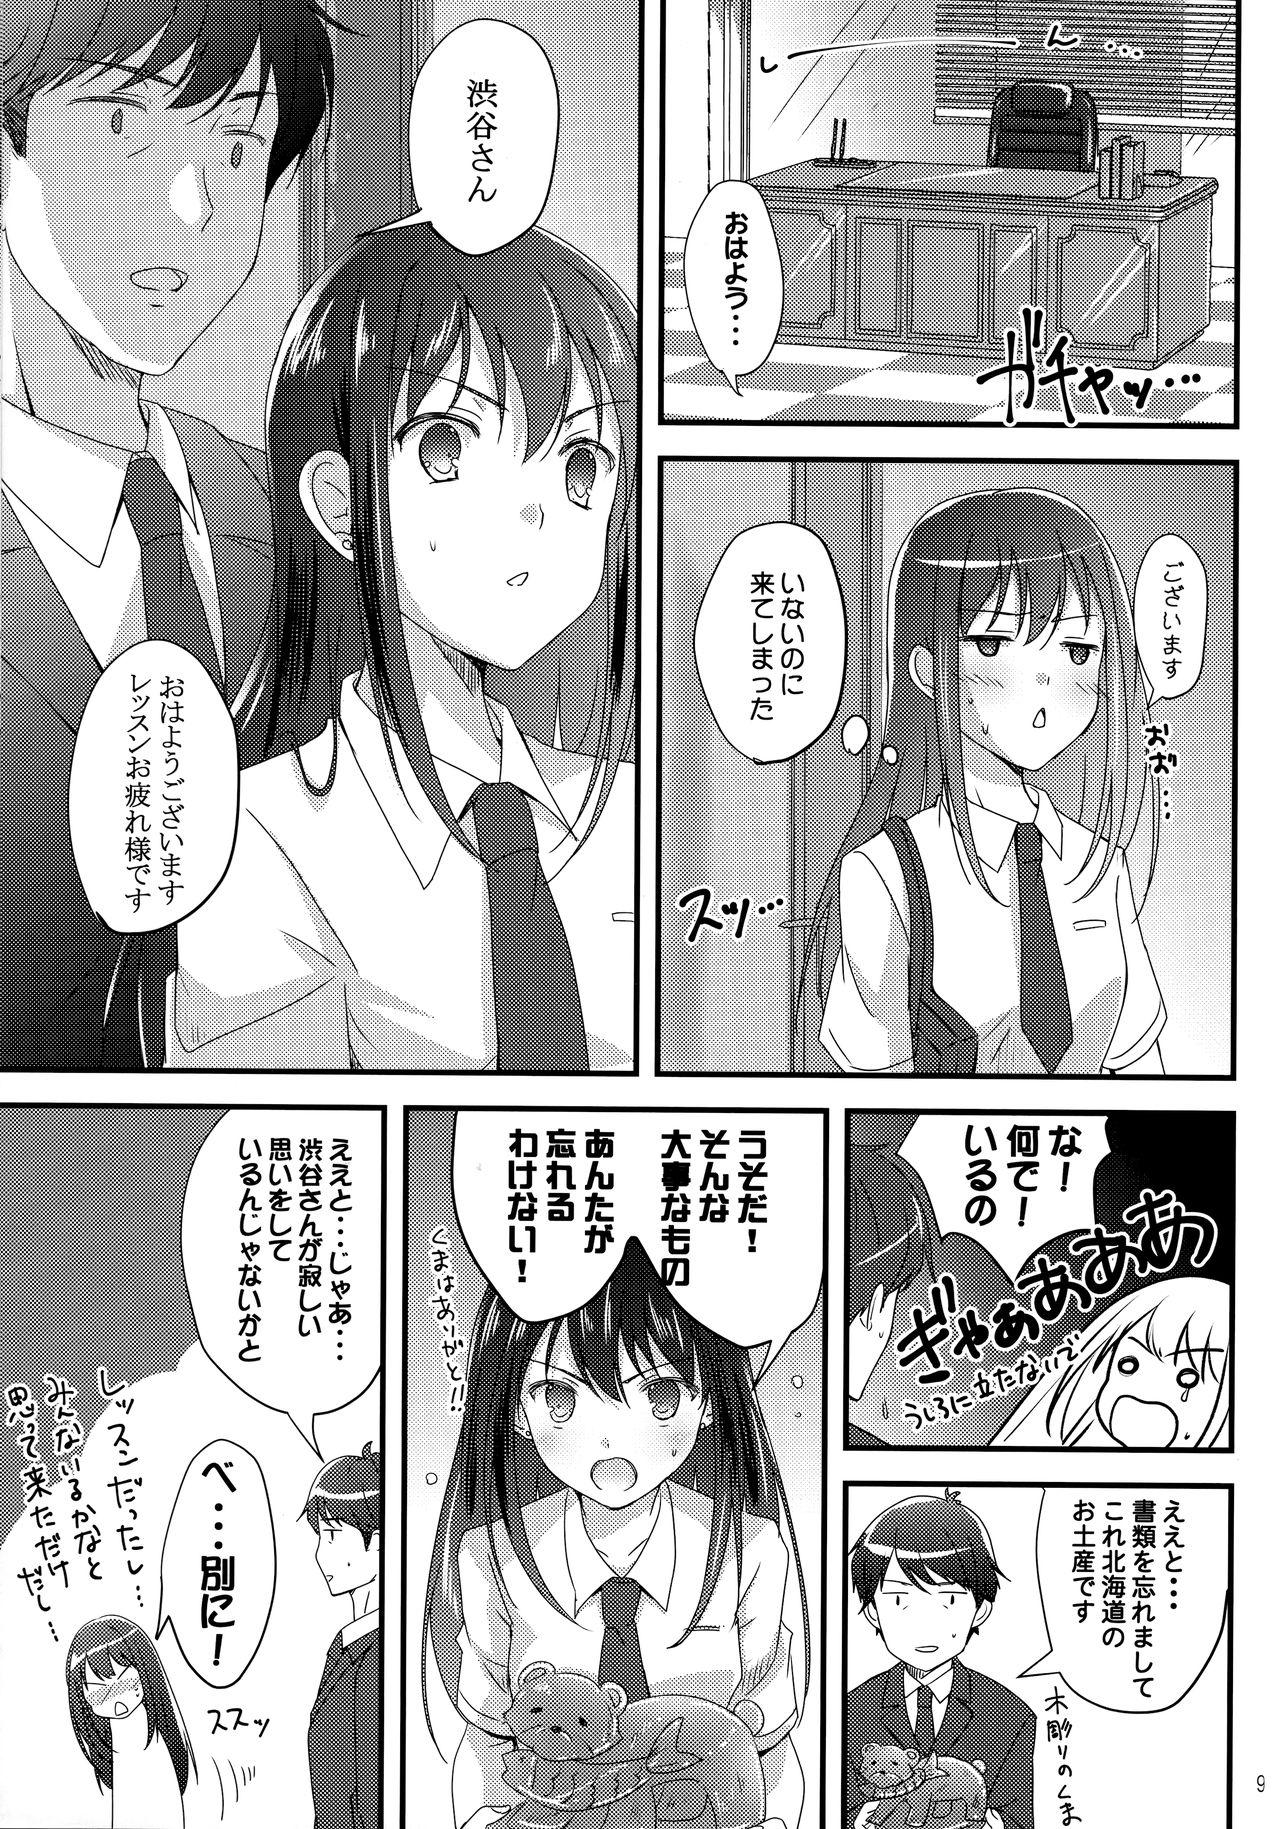 Whipping Miwaku no Love Situation - The idolmaster Hoe - Page 8